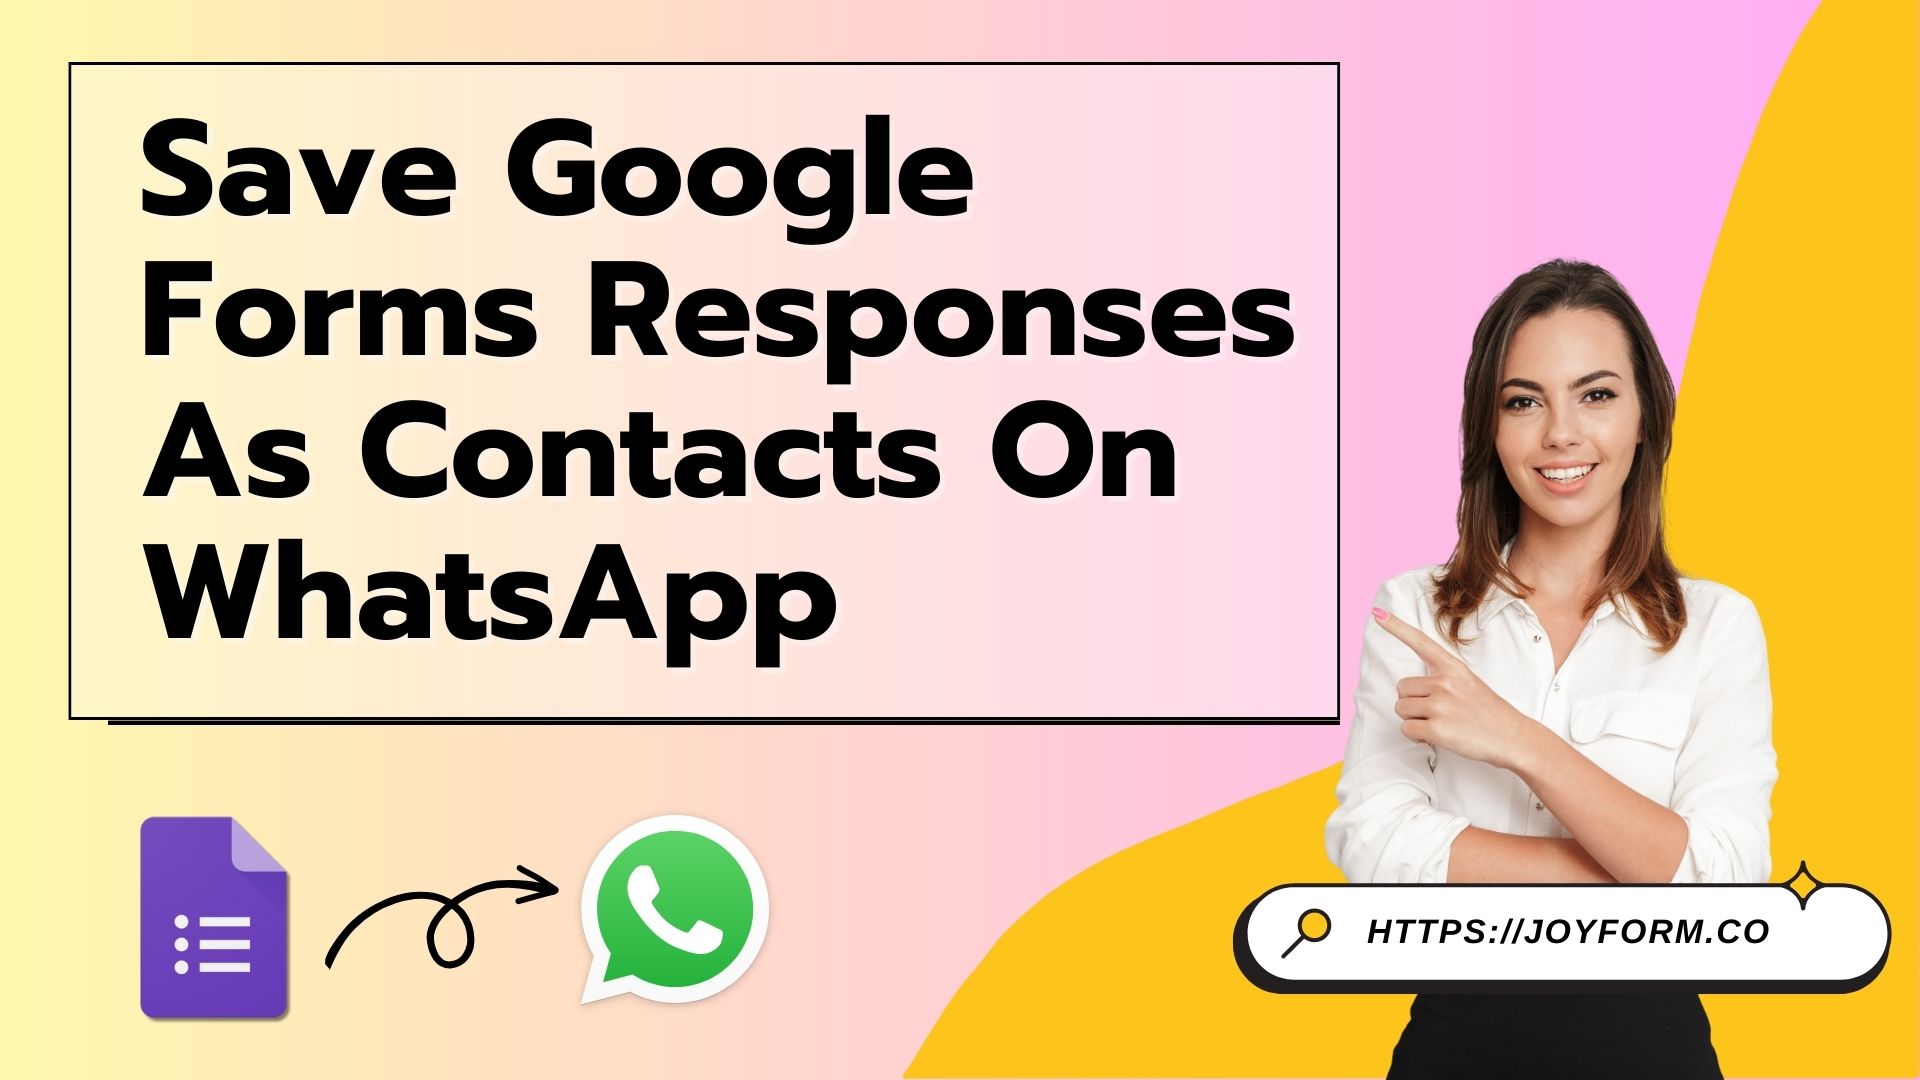 [How To] Save Contacts of Google Forms Responses in WhatsApp